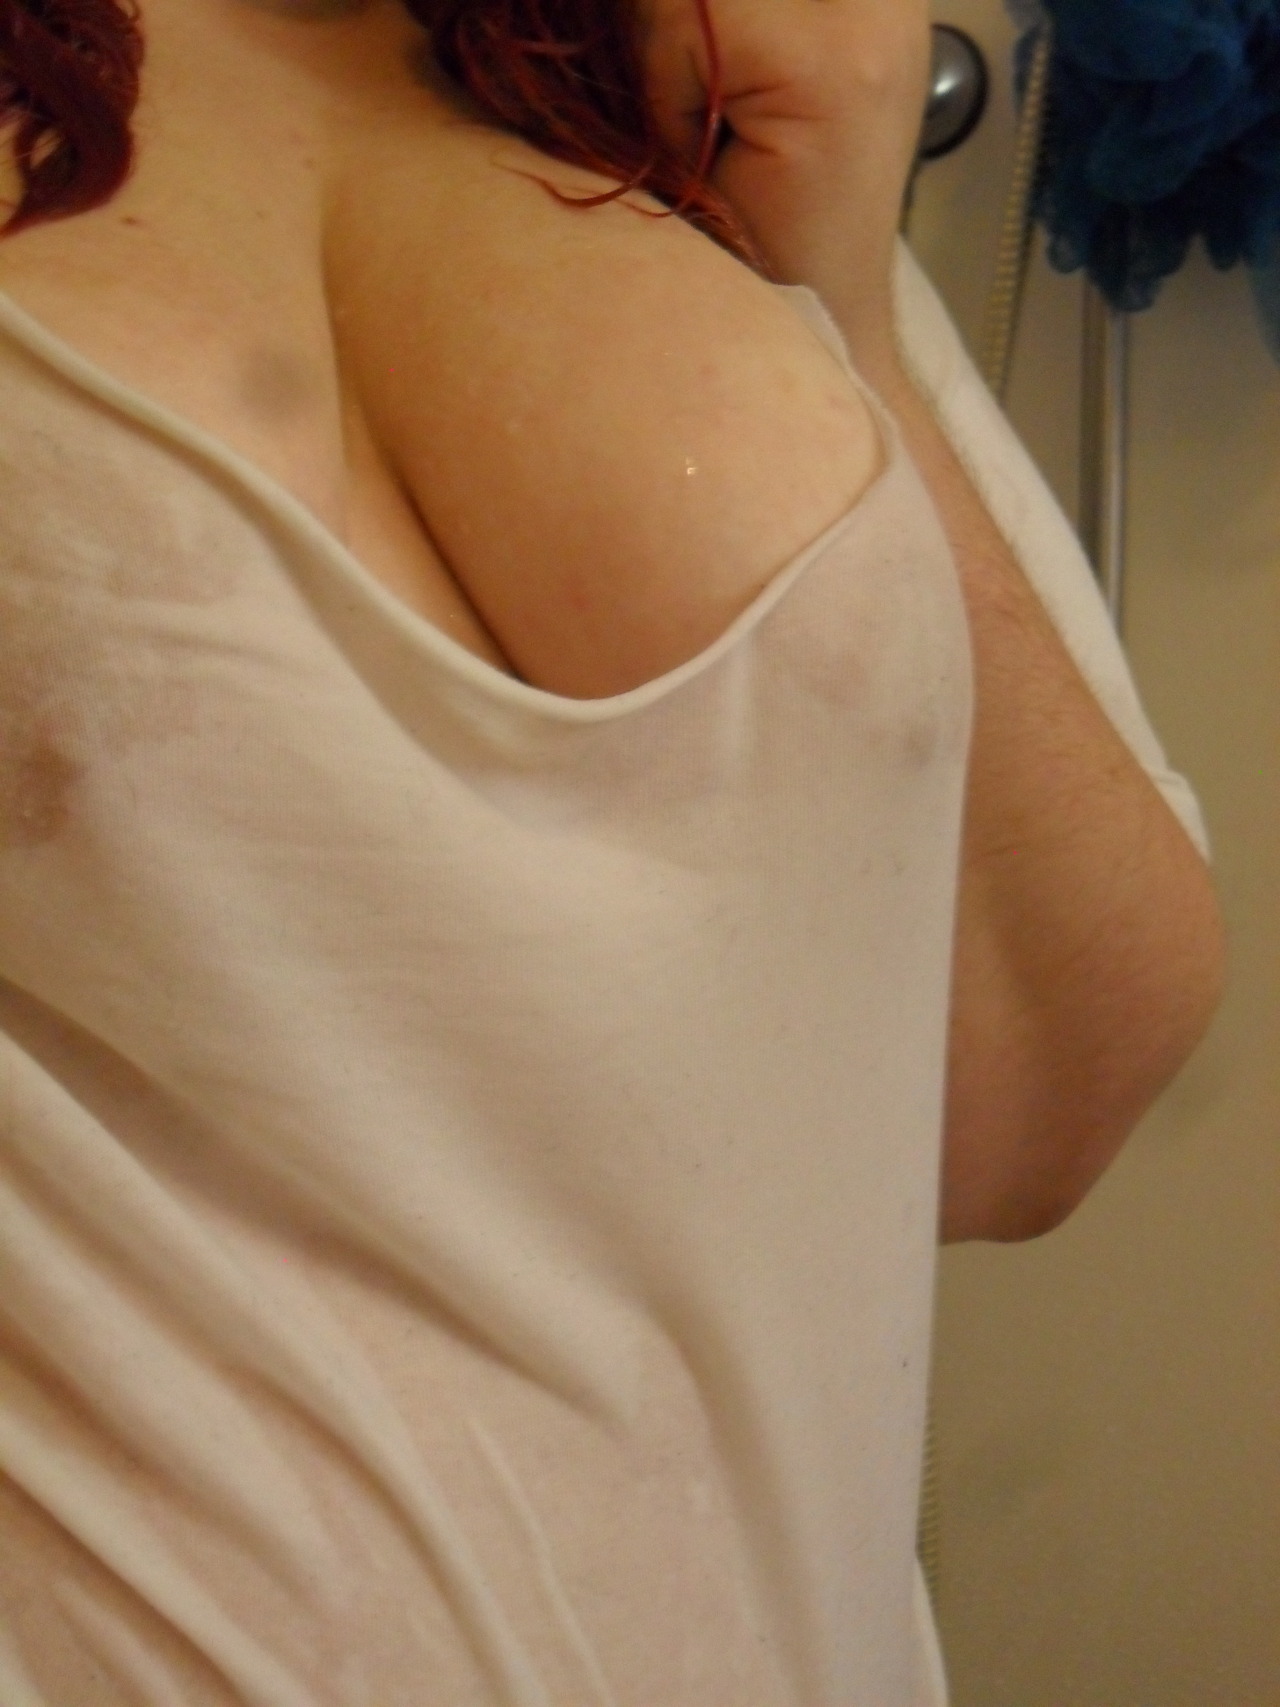 kittenwantscream:  Awkward as hell looking but I had a request for wet tshirt pics!